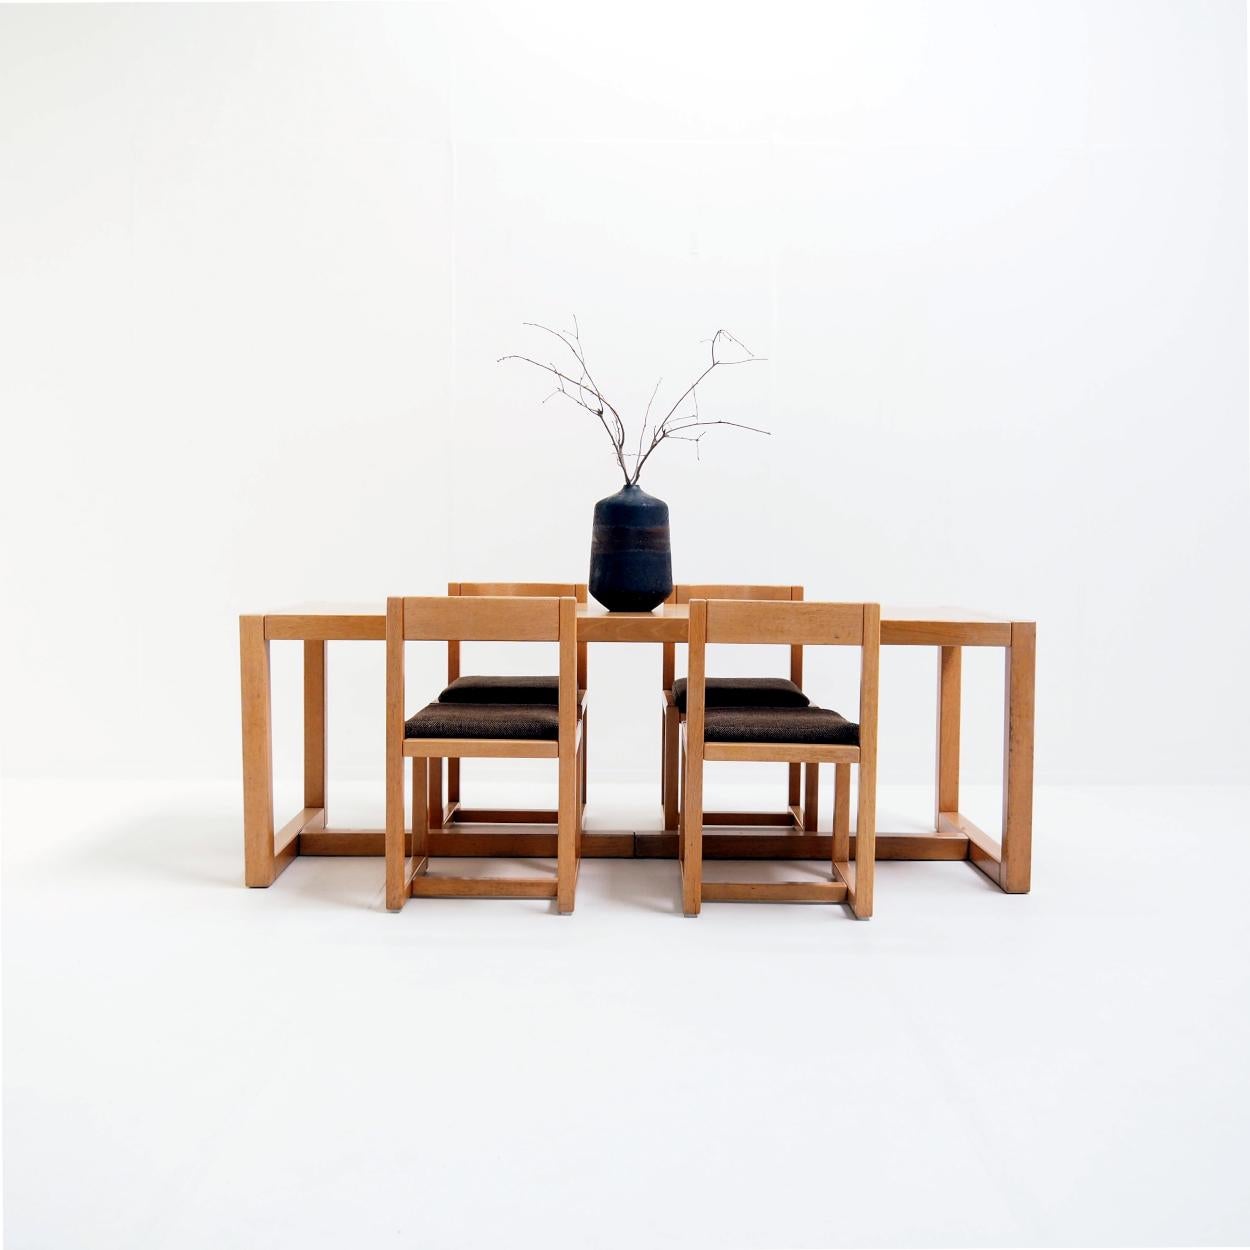 Beautiful vintage dining set consisting of a table with matching chairs.

The whole is designed in such a way that everything together forms a beautiful ‘block’. Very architectural.

The set is made of solid pine and is in fair vintage condition,